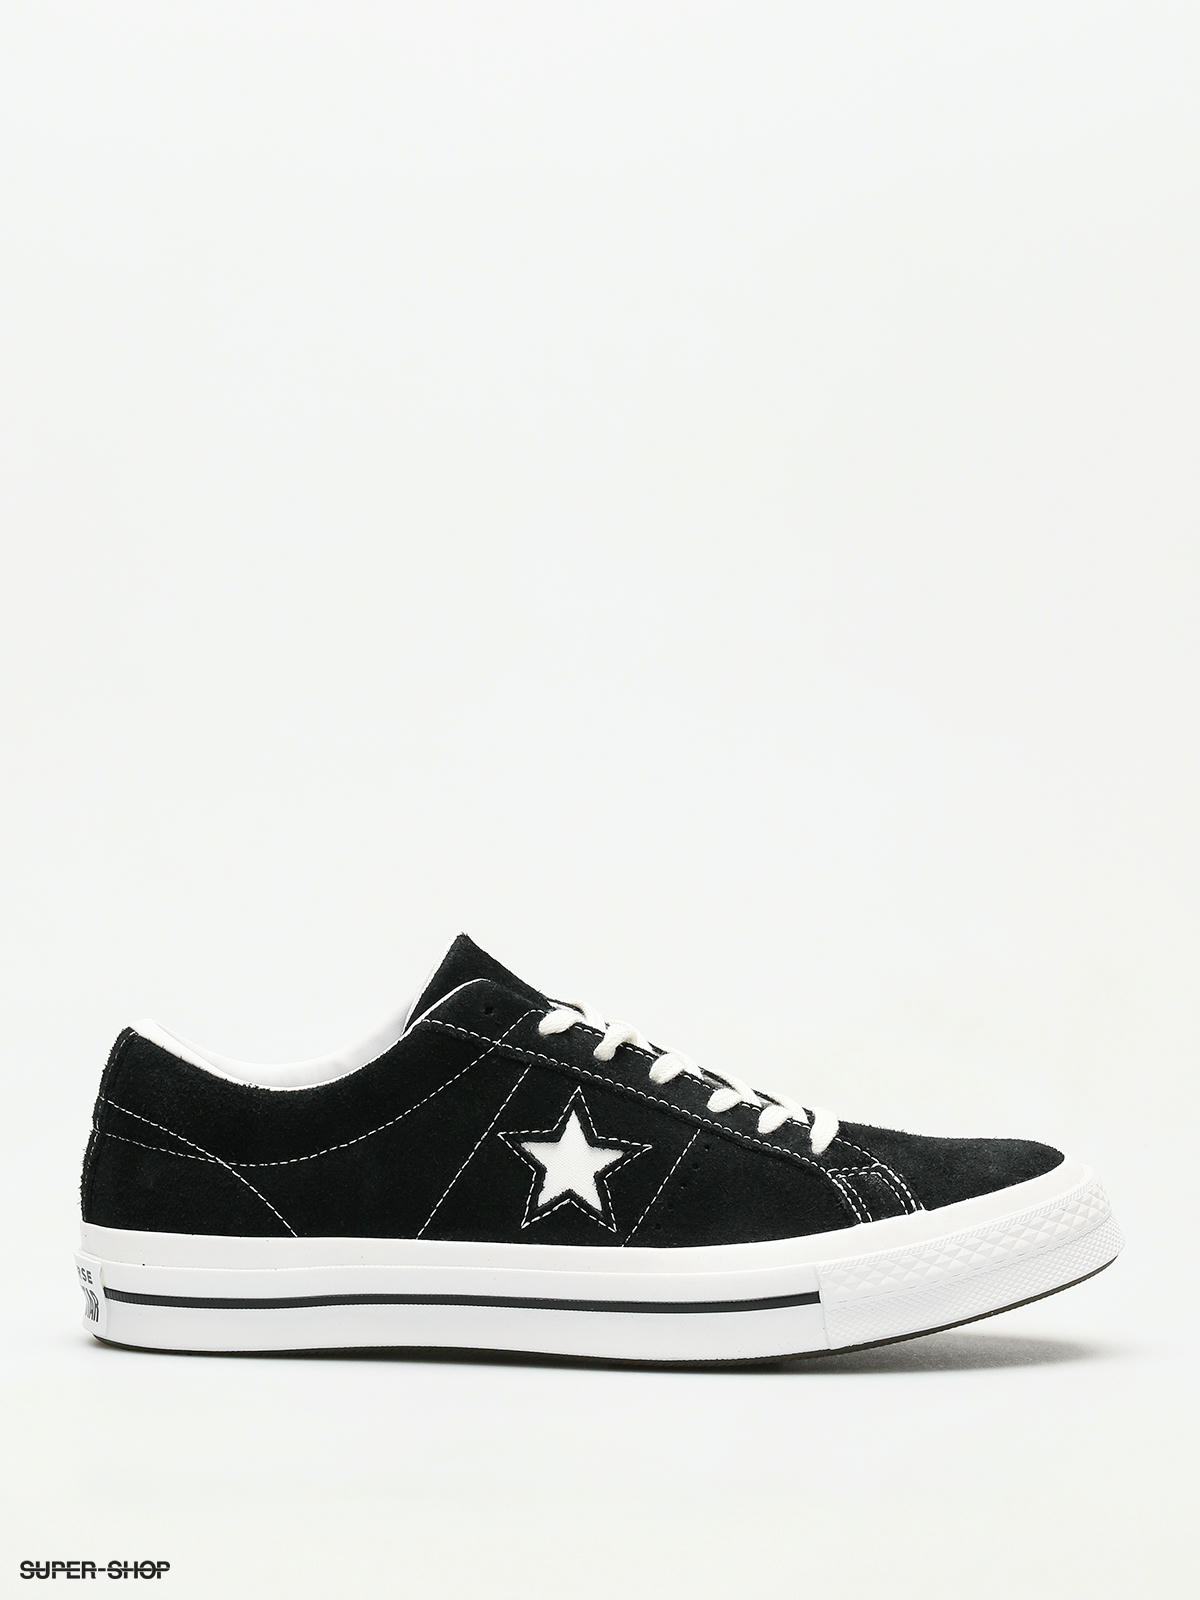 converse one star classicLimited 